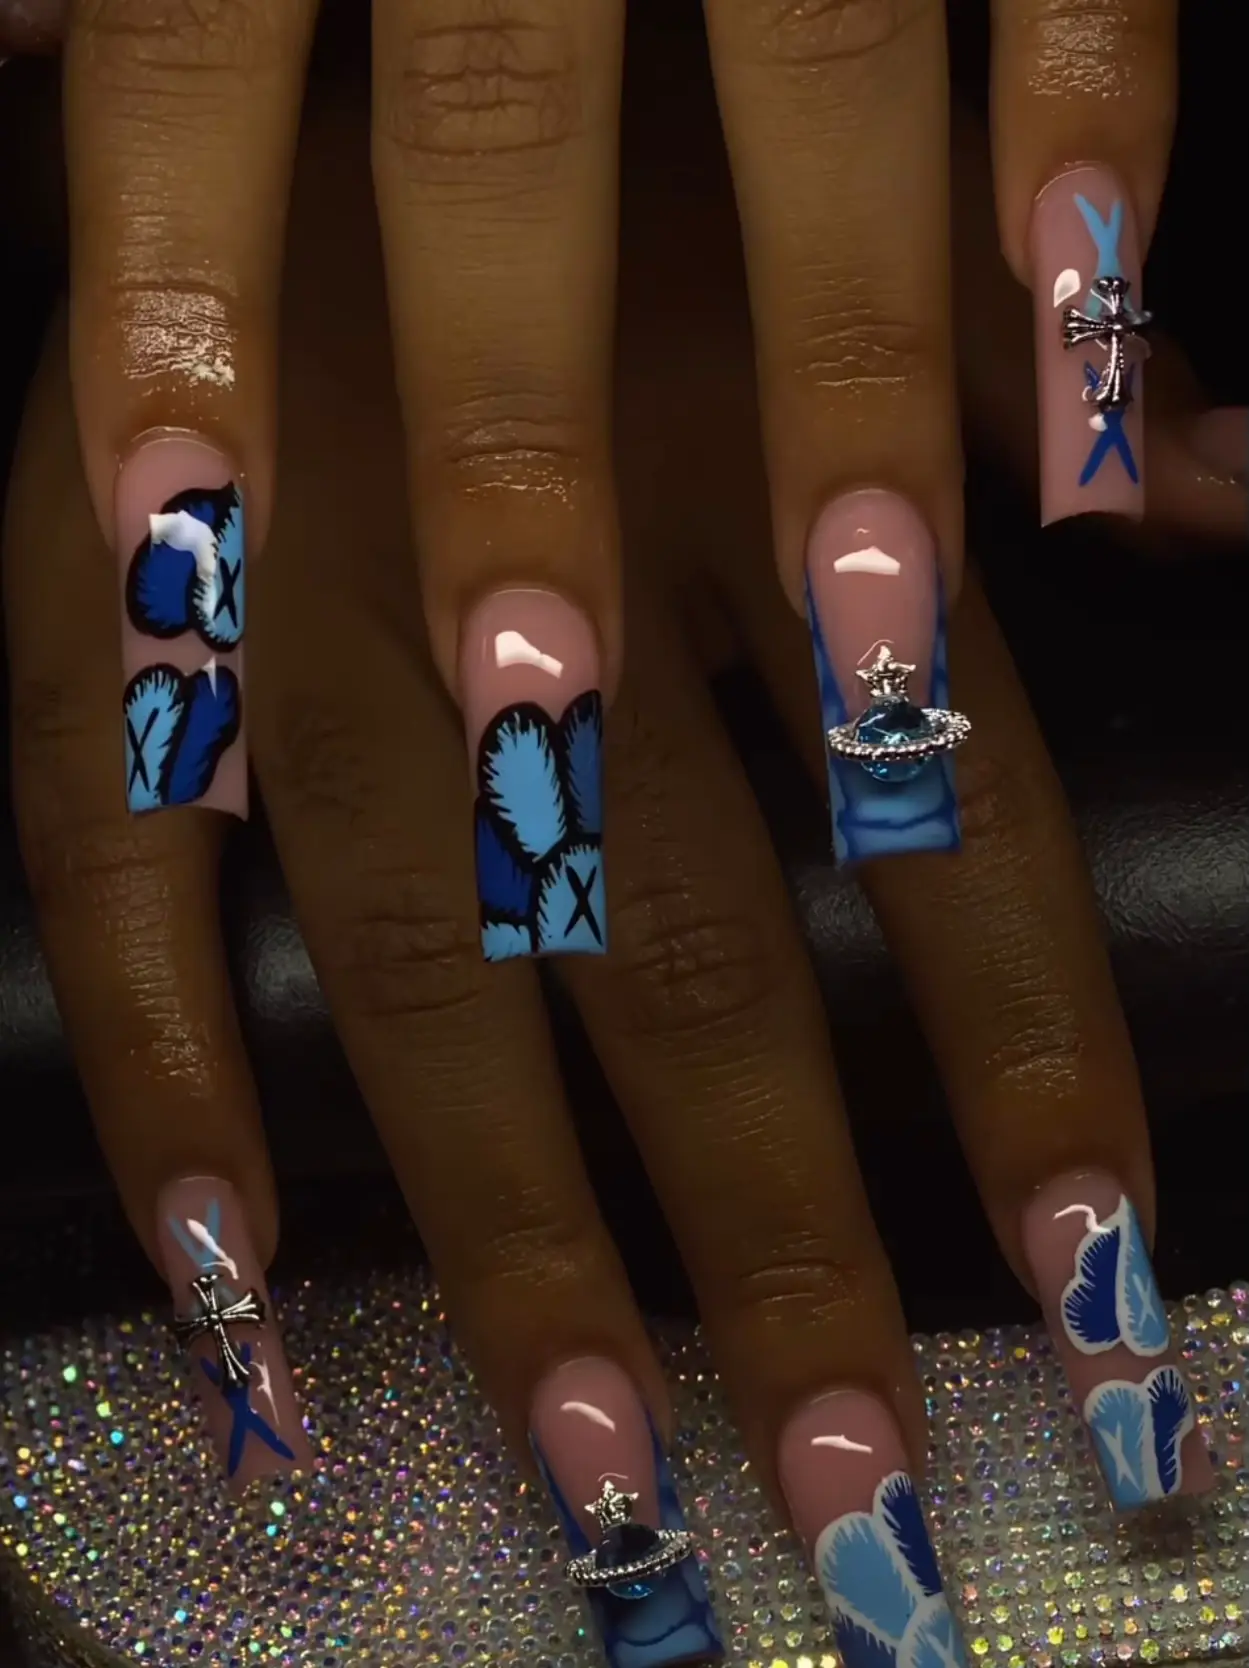 Blue Kaws nails😵💙, Gallery posted by Destinie